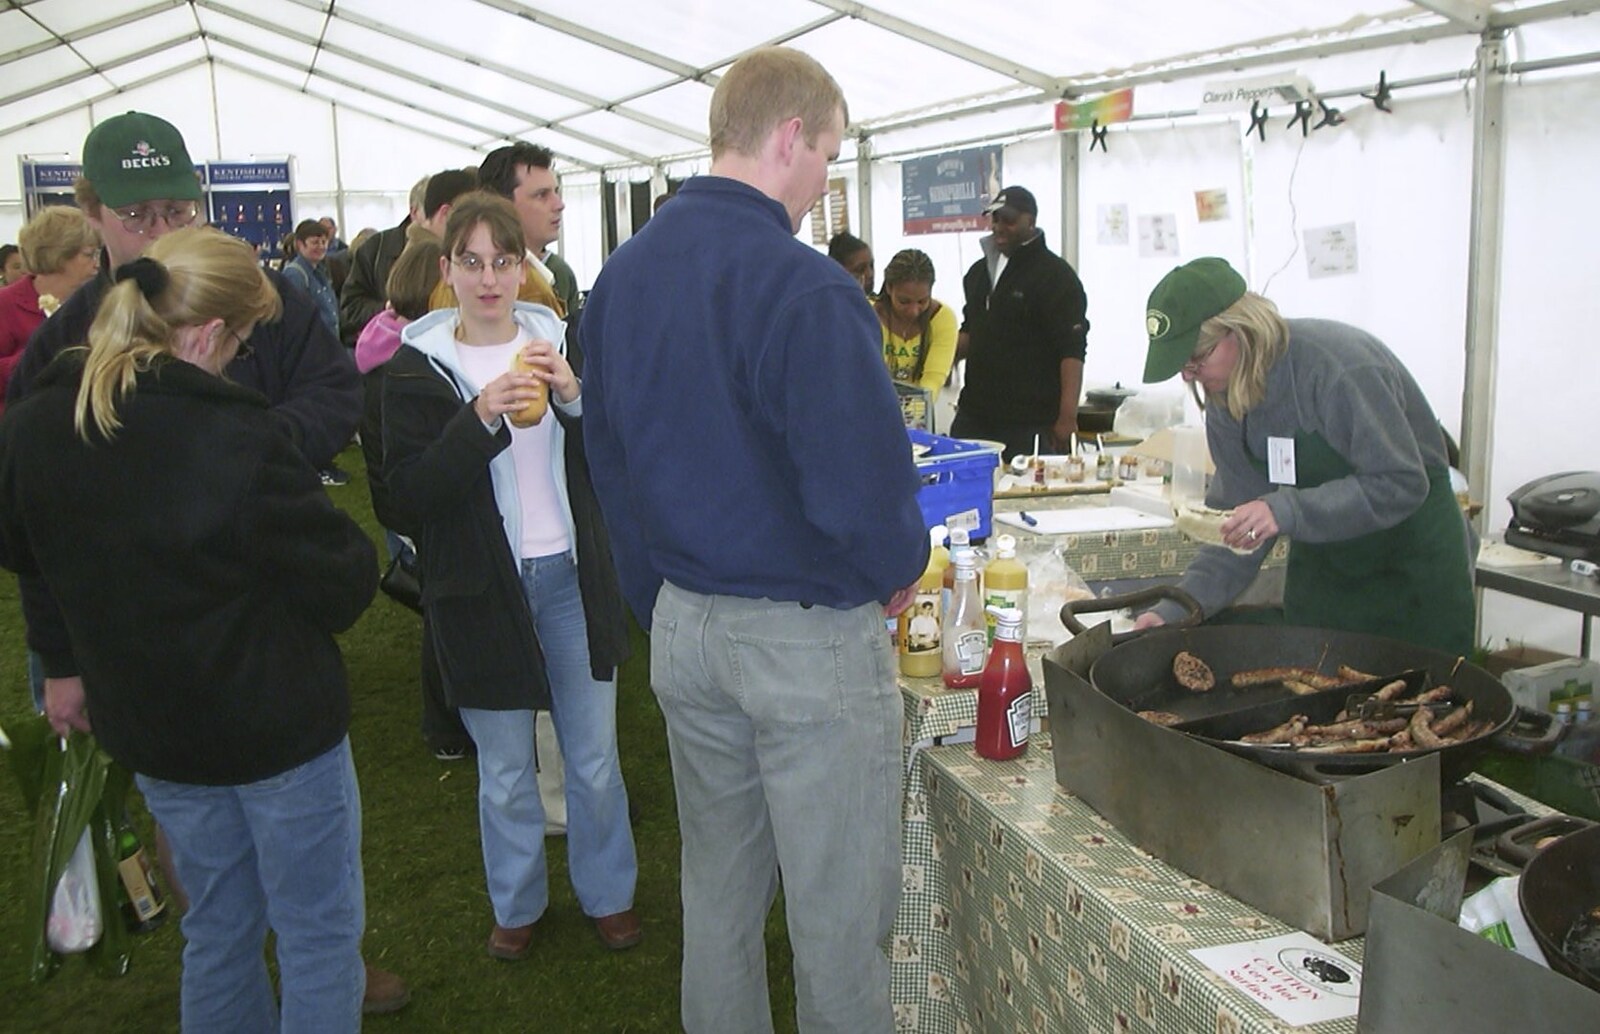 Back in the food tent for some burgers and sausages from A Trip Around Leeds Castle, Maidstone, Kent - 9th May 2004